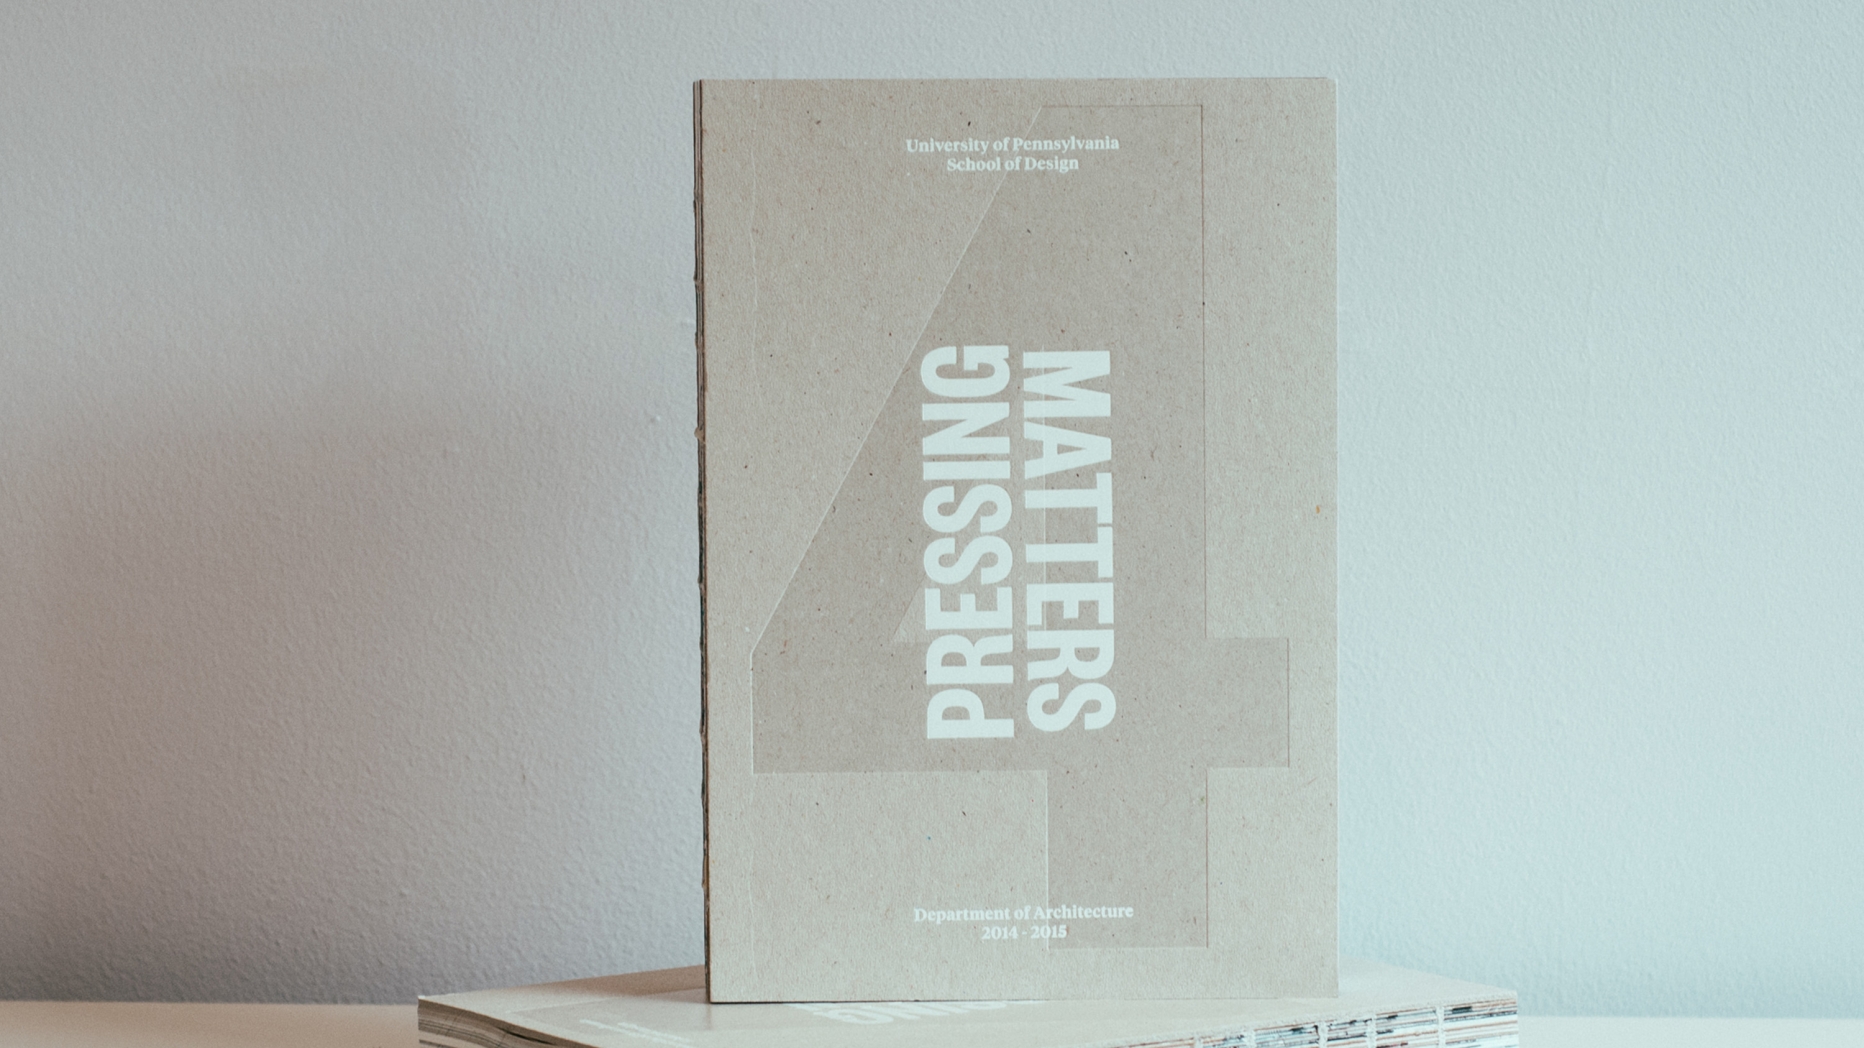 Two copies of pressing matters 4